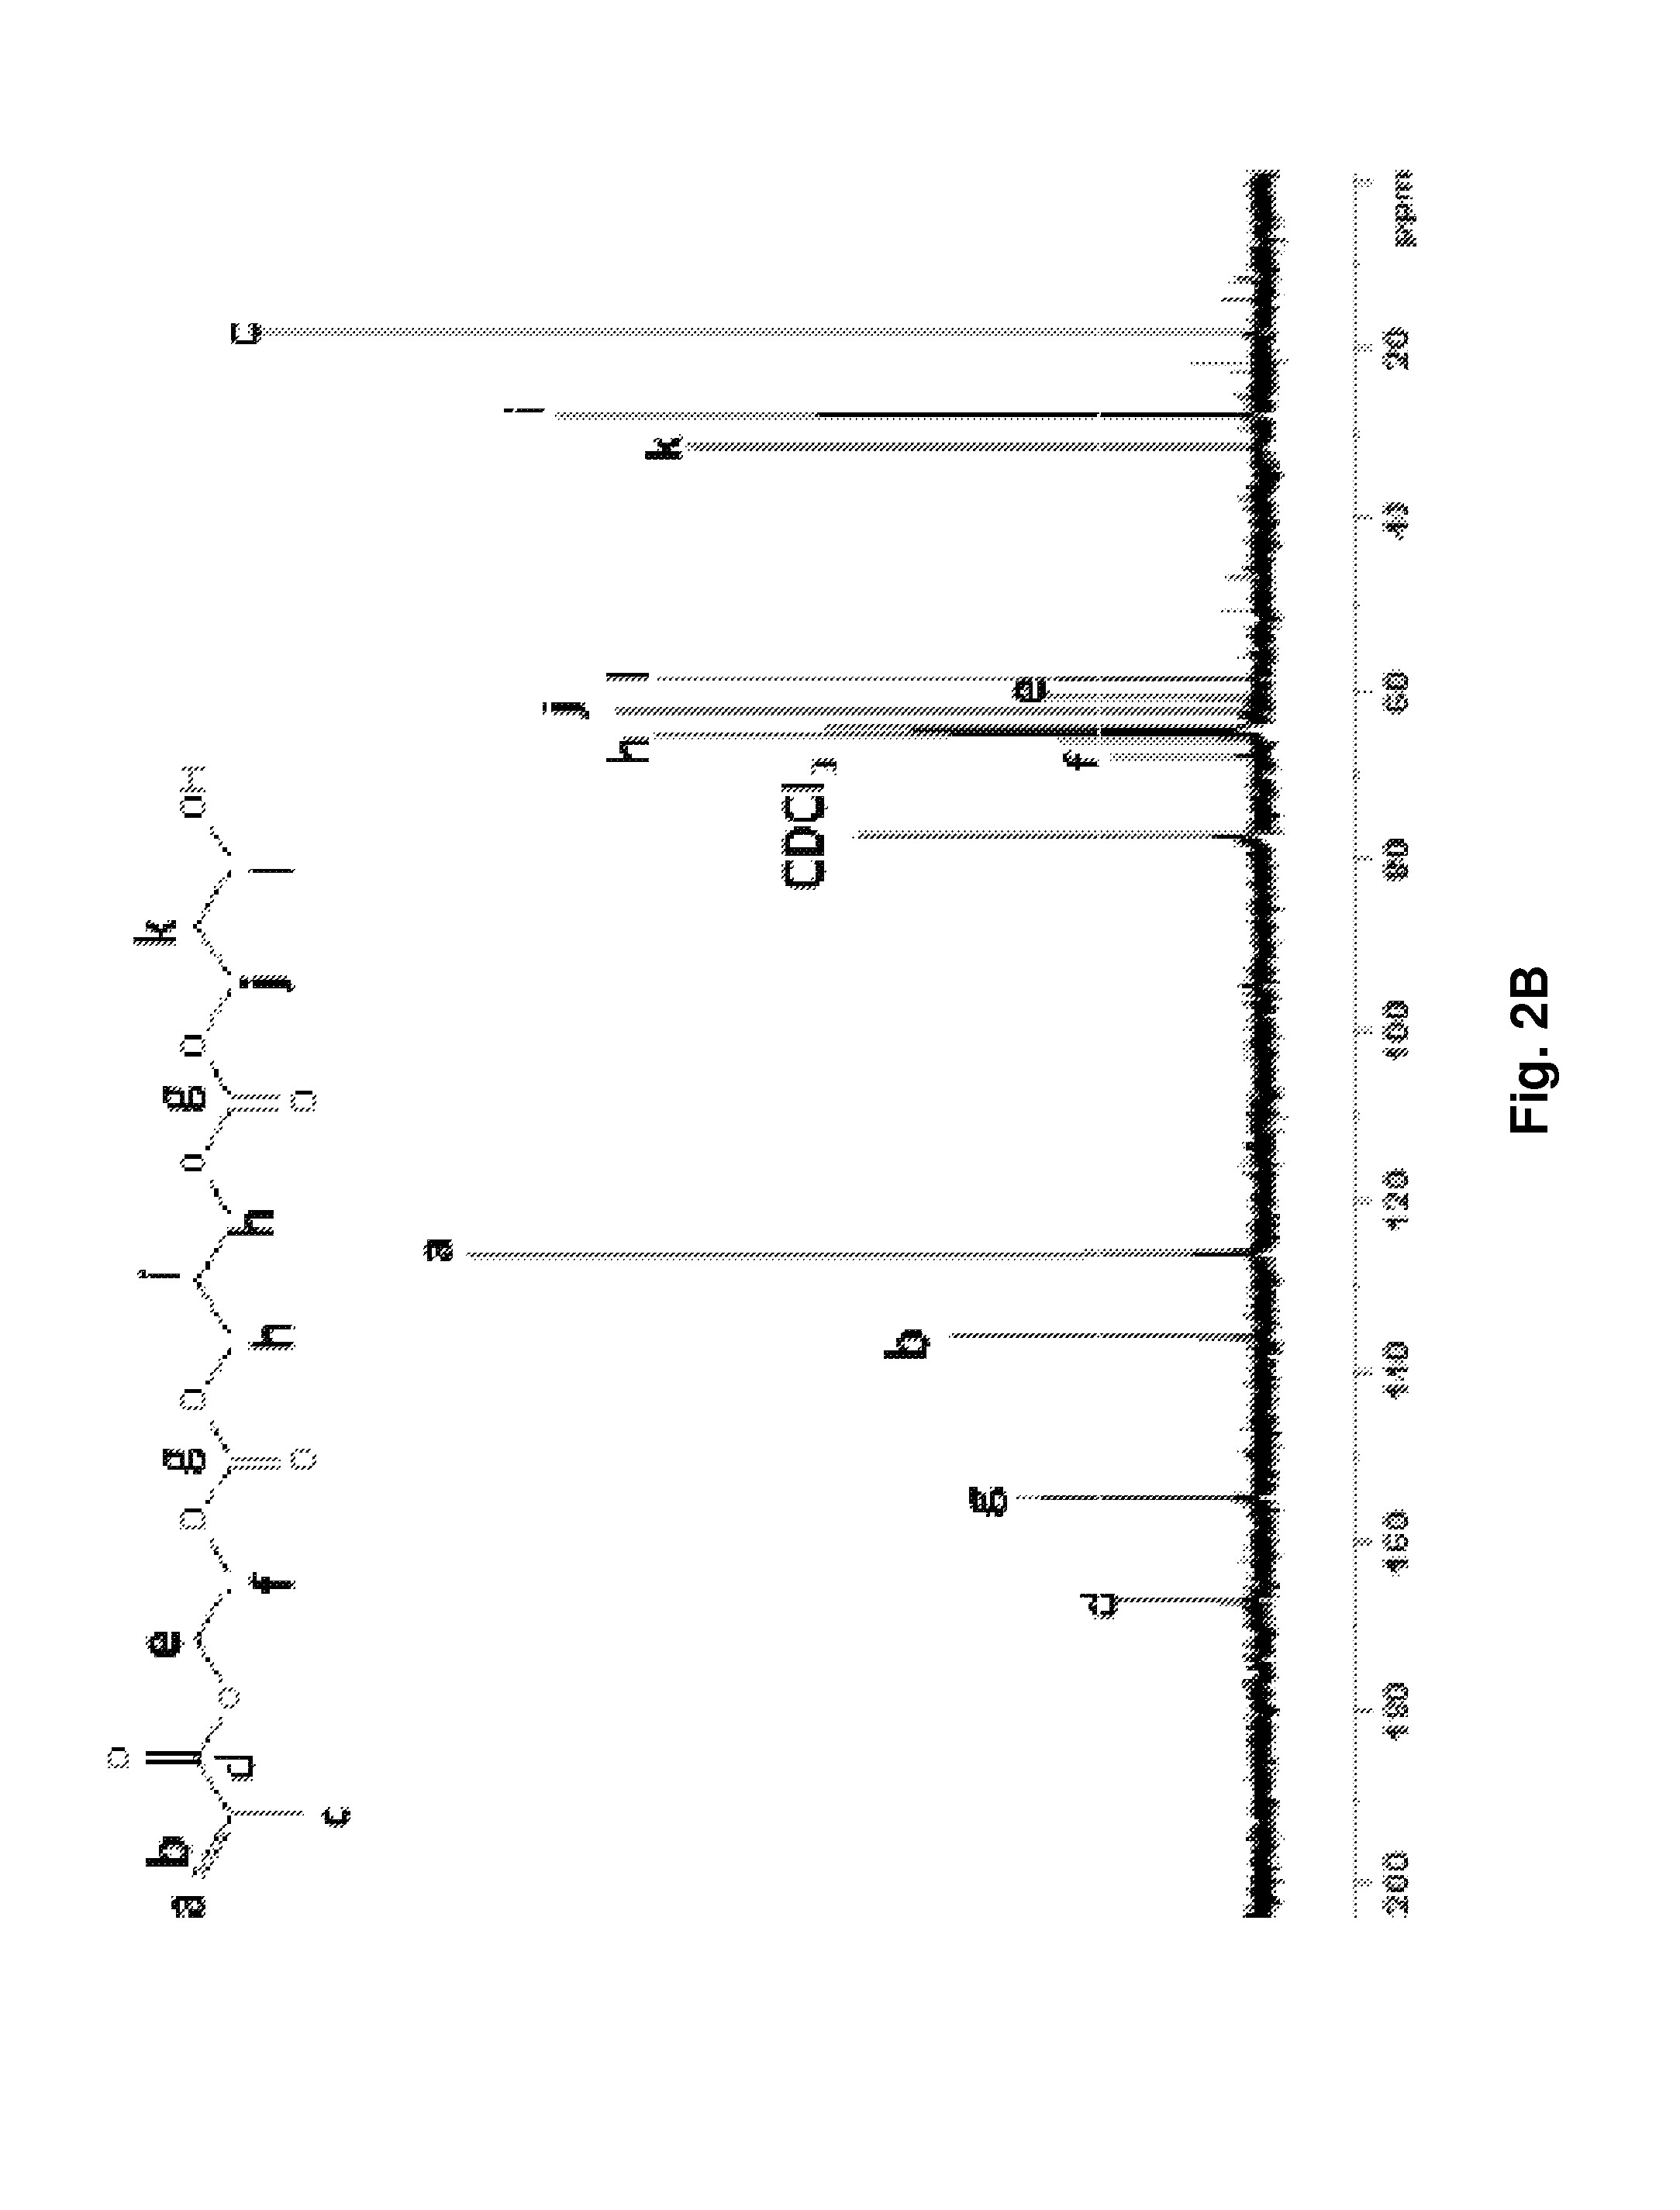 Thermoresponsive, biodegradable, elastomeric material and uses therefor